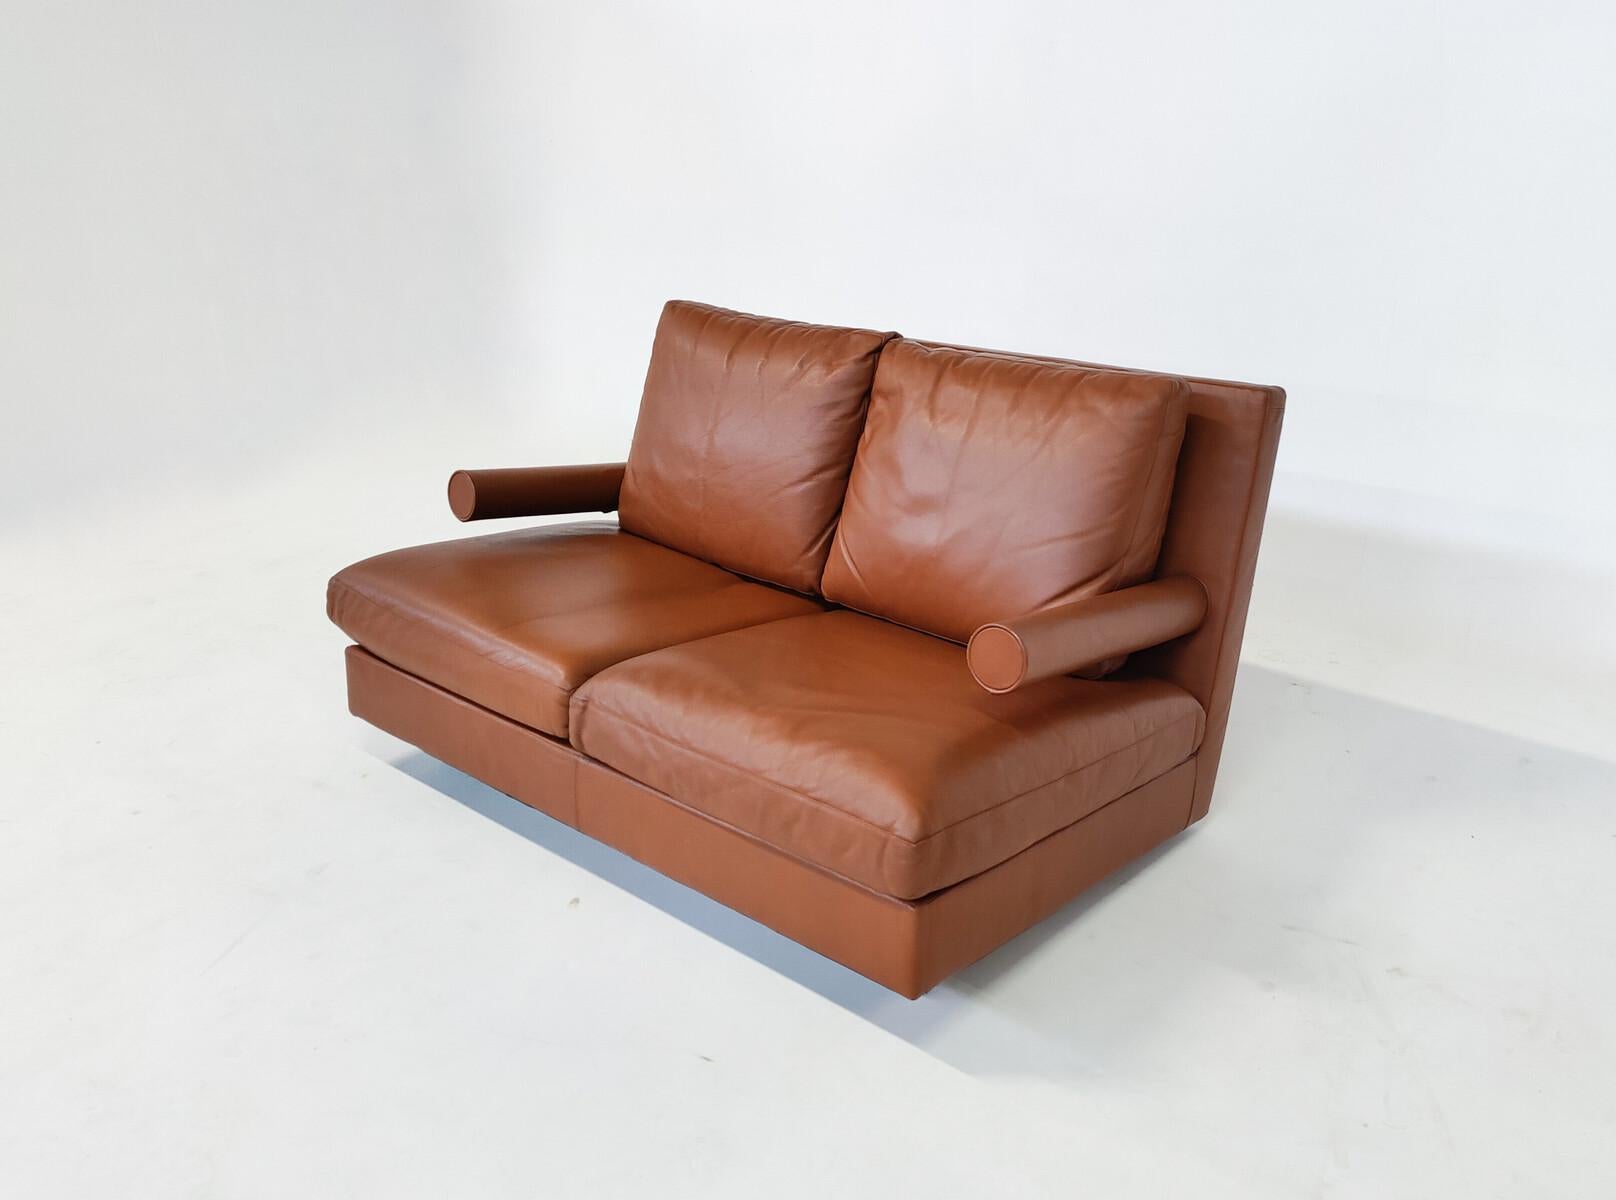 Leather Mid-Century Modern Baisity Two Seater Sofa by Antonio Citterio for B&B Italia For Sale